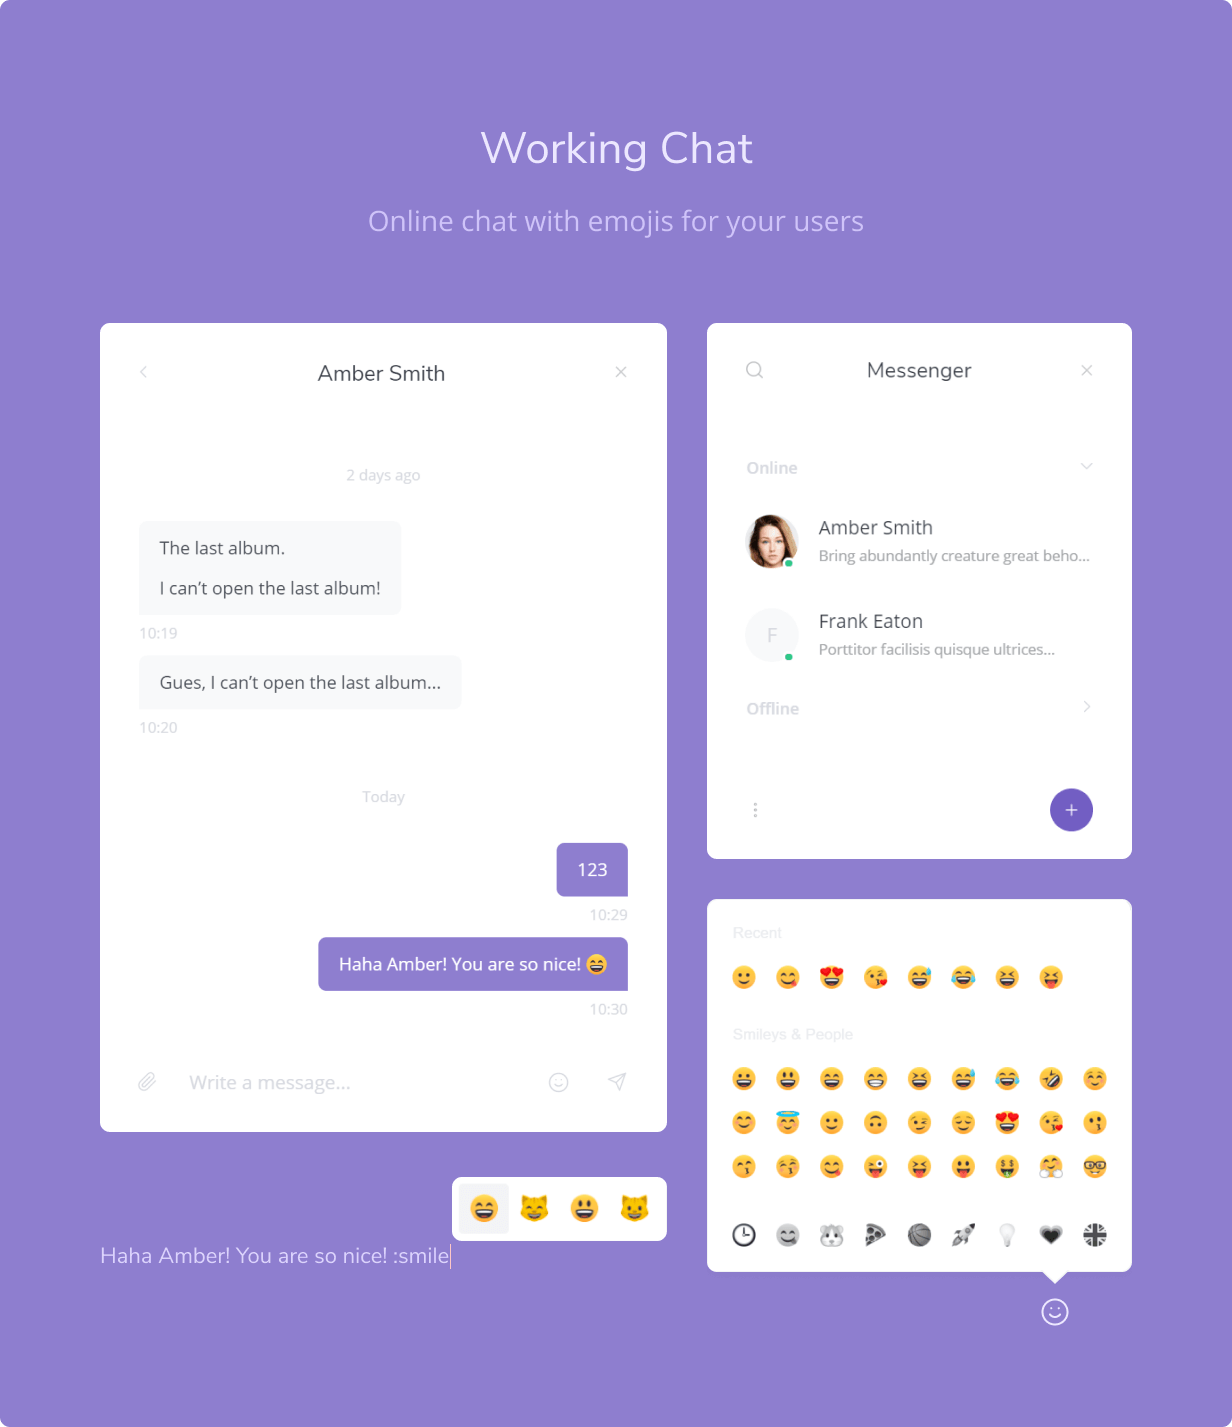 Working Chat